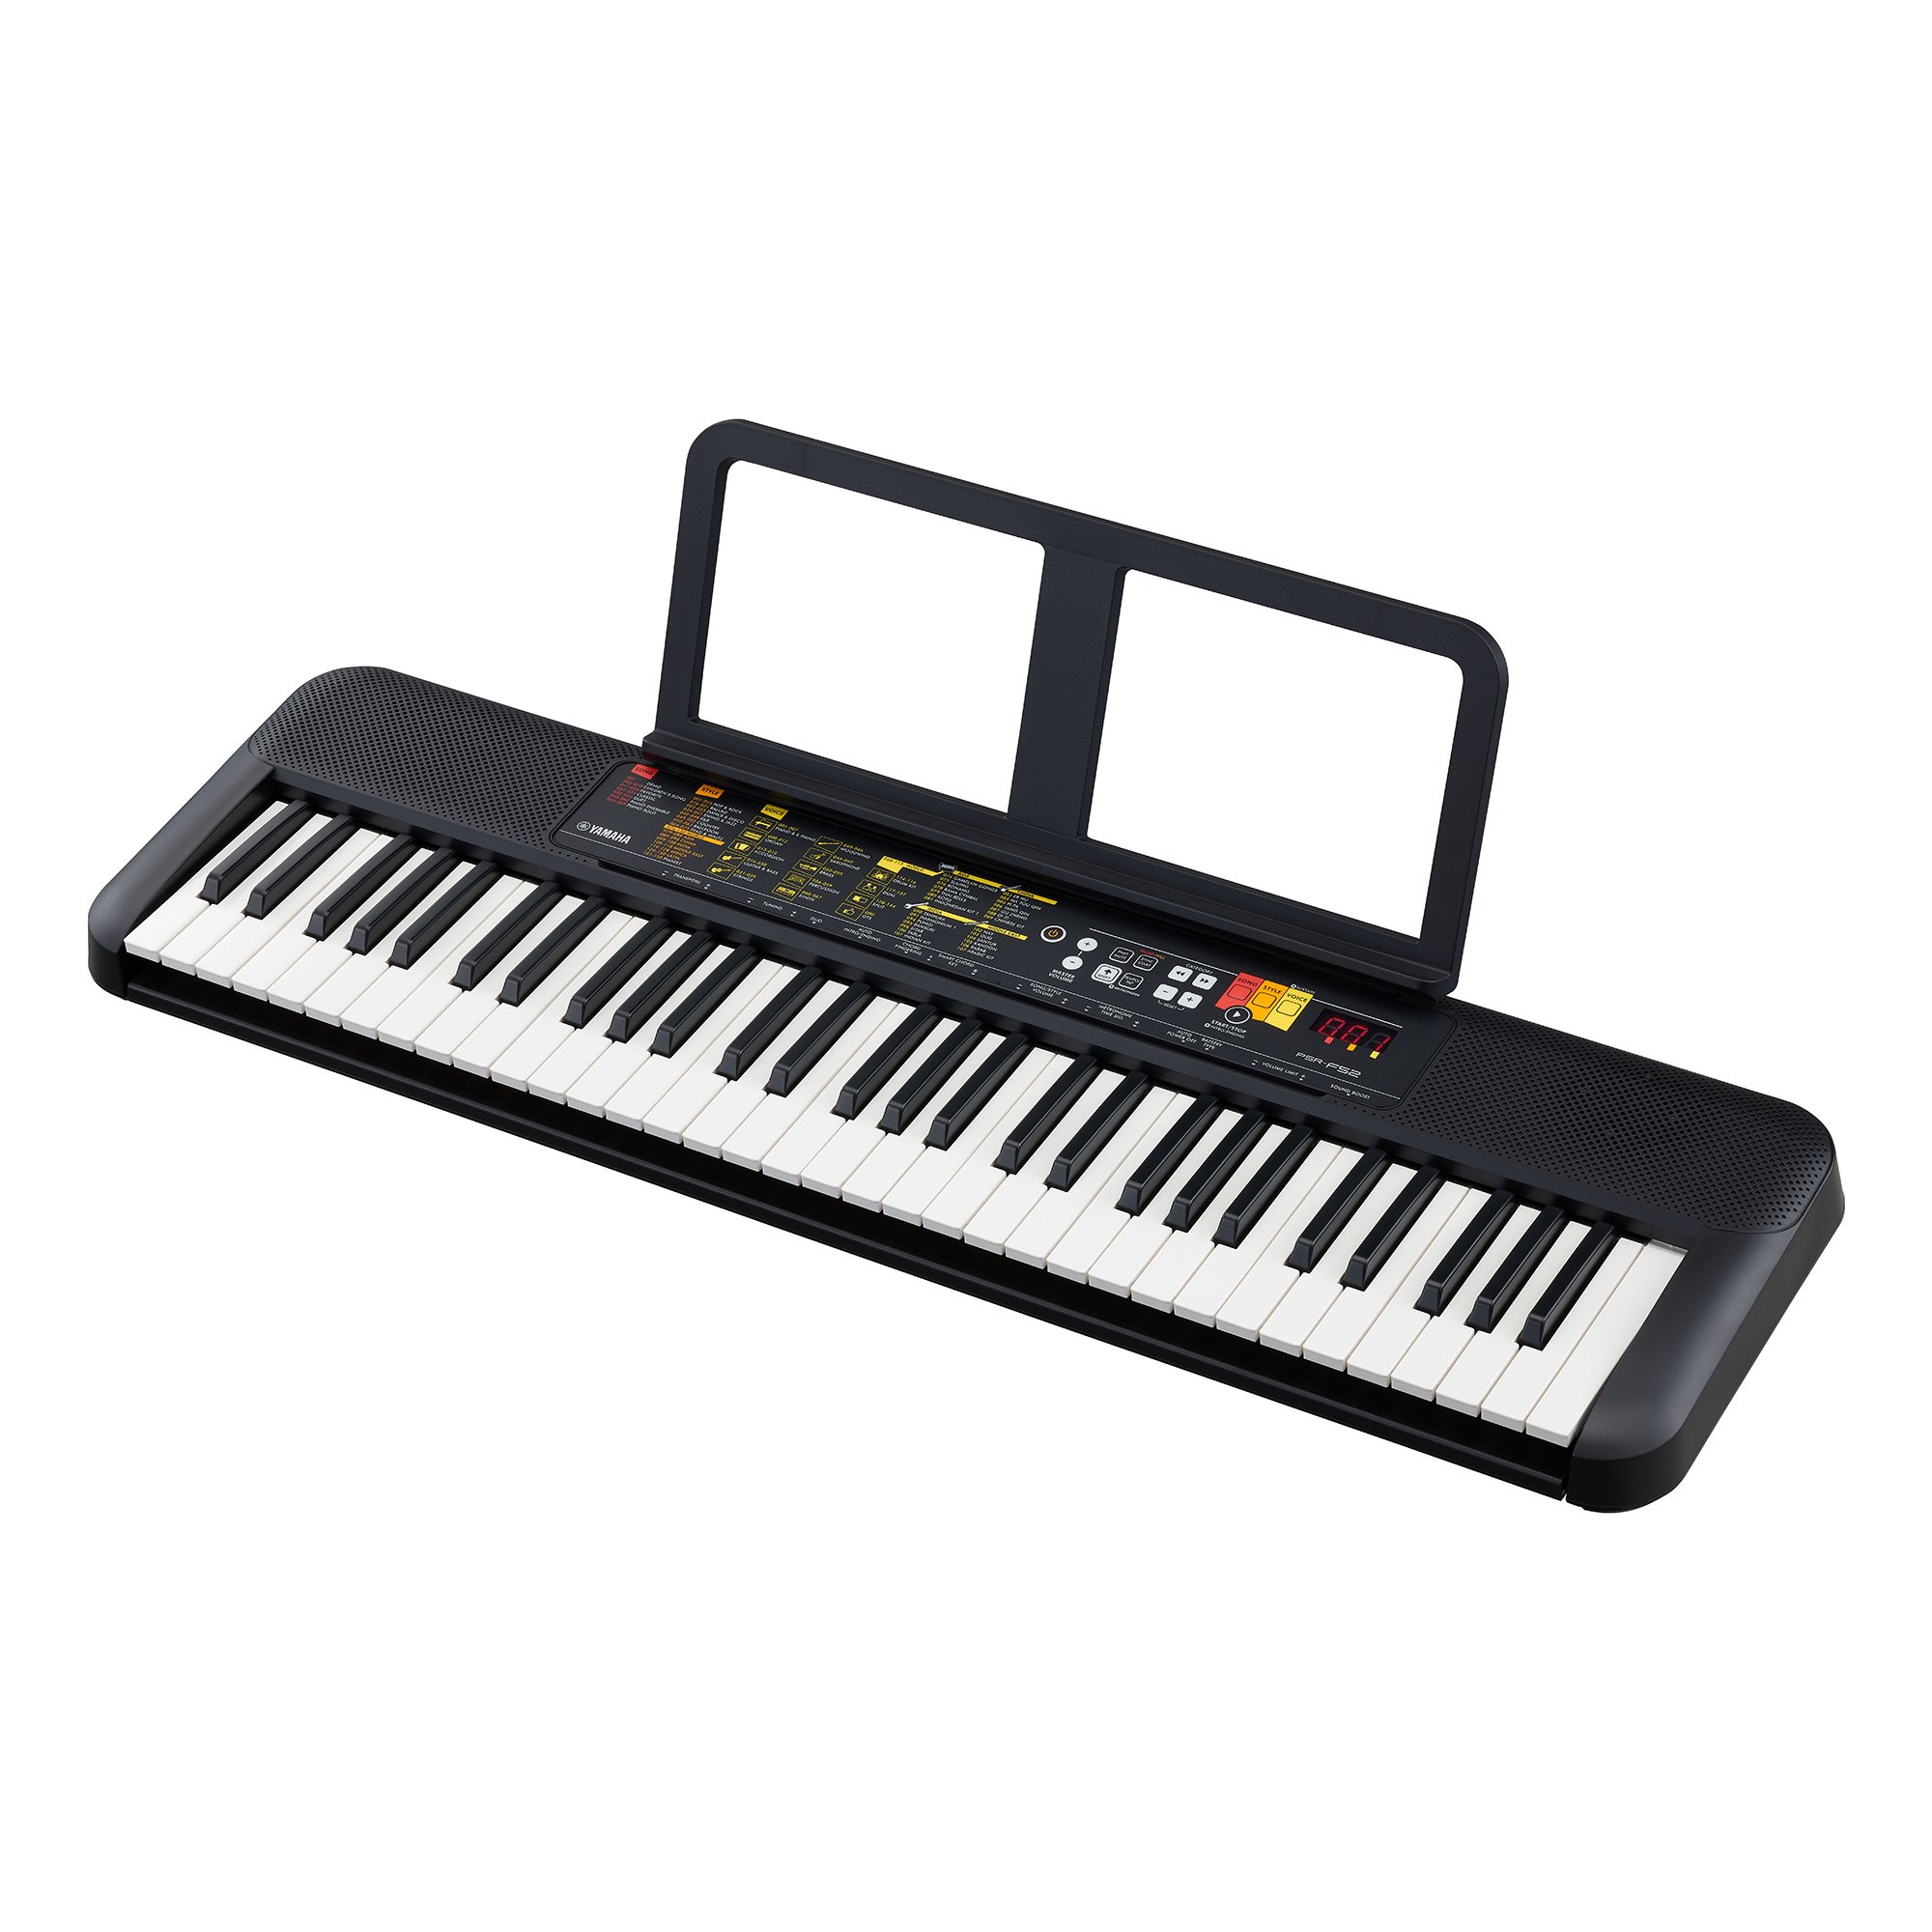 PSR-F52 - Overview - Portable Keyboards - Keyboard Instruments - Musical  Instruments - Products - Yamaha - Africa / Asia / CIS / Latin America /  Middle East / Oceania